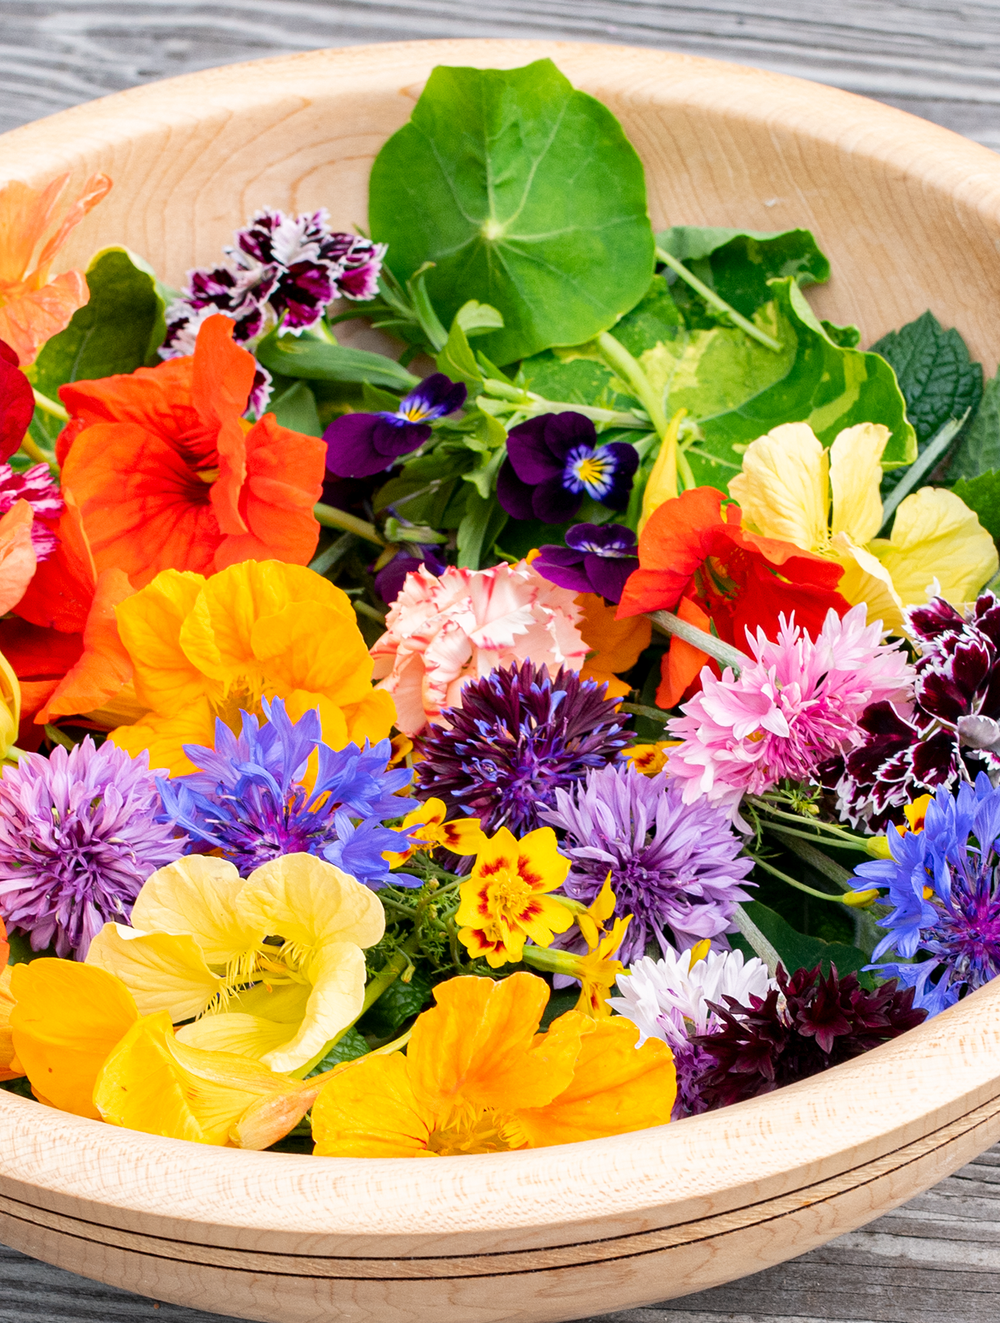 Rediscover Edible Flowers